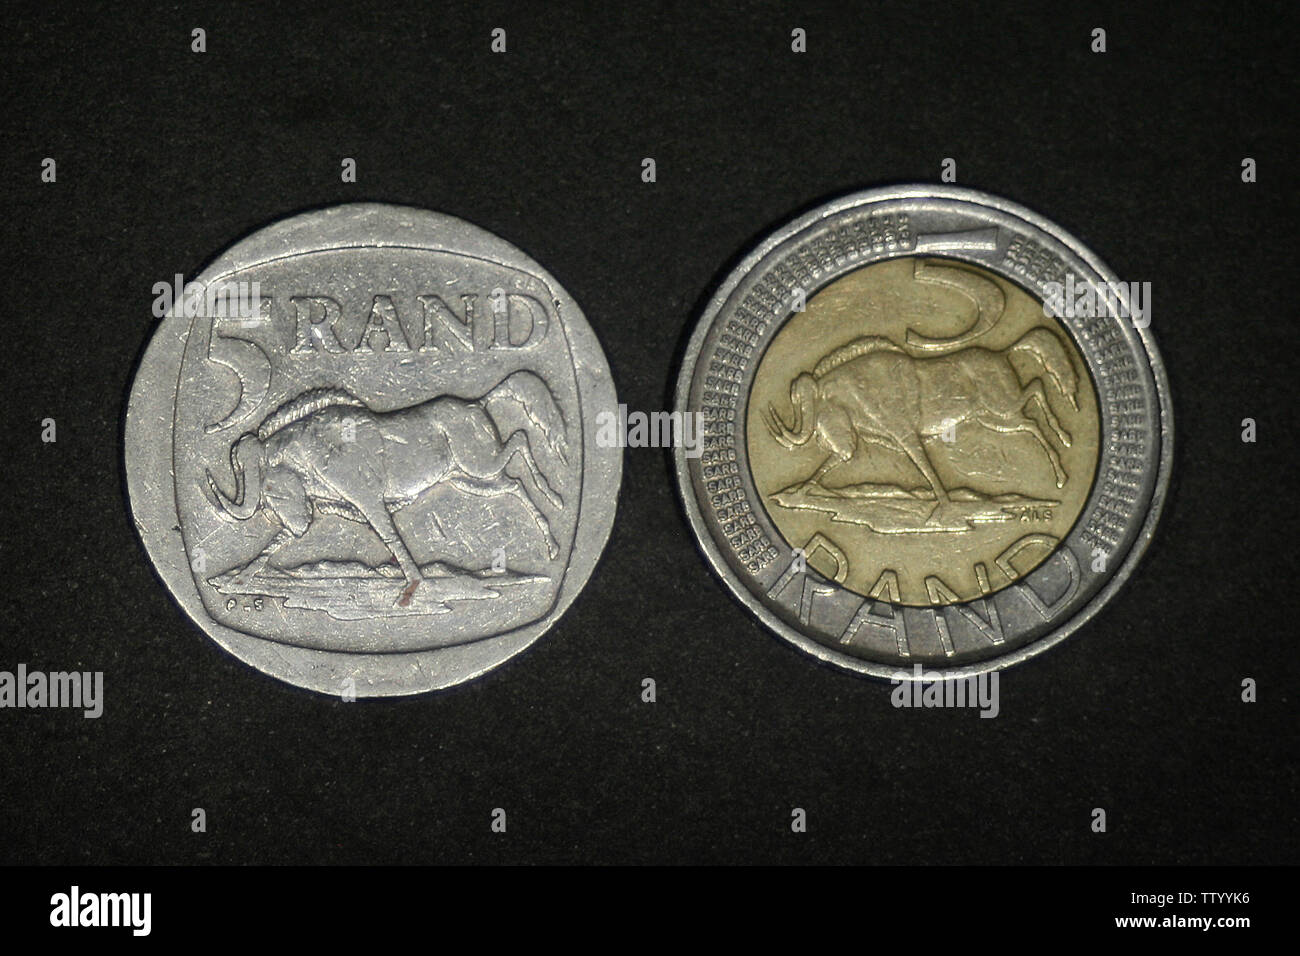 South Africa - 5 rand (1994-1995) and 5 rand, 2004-2016 Stock Photo